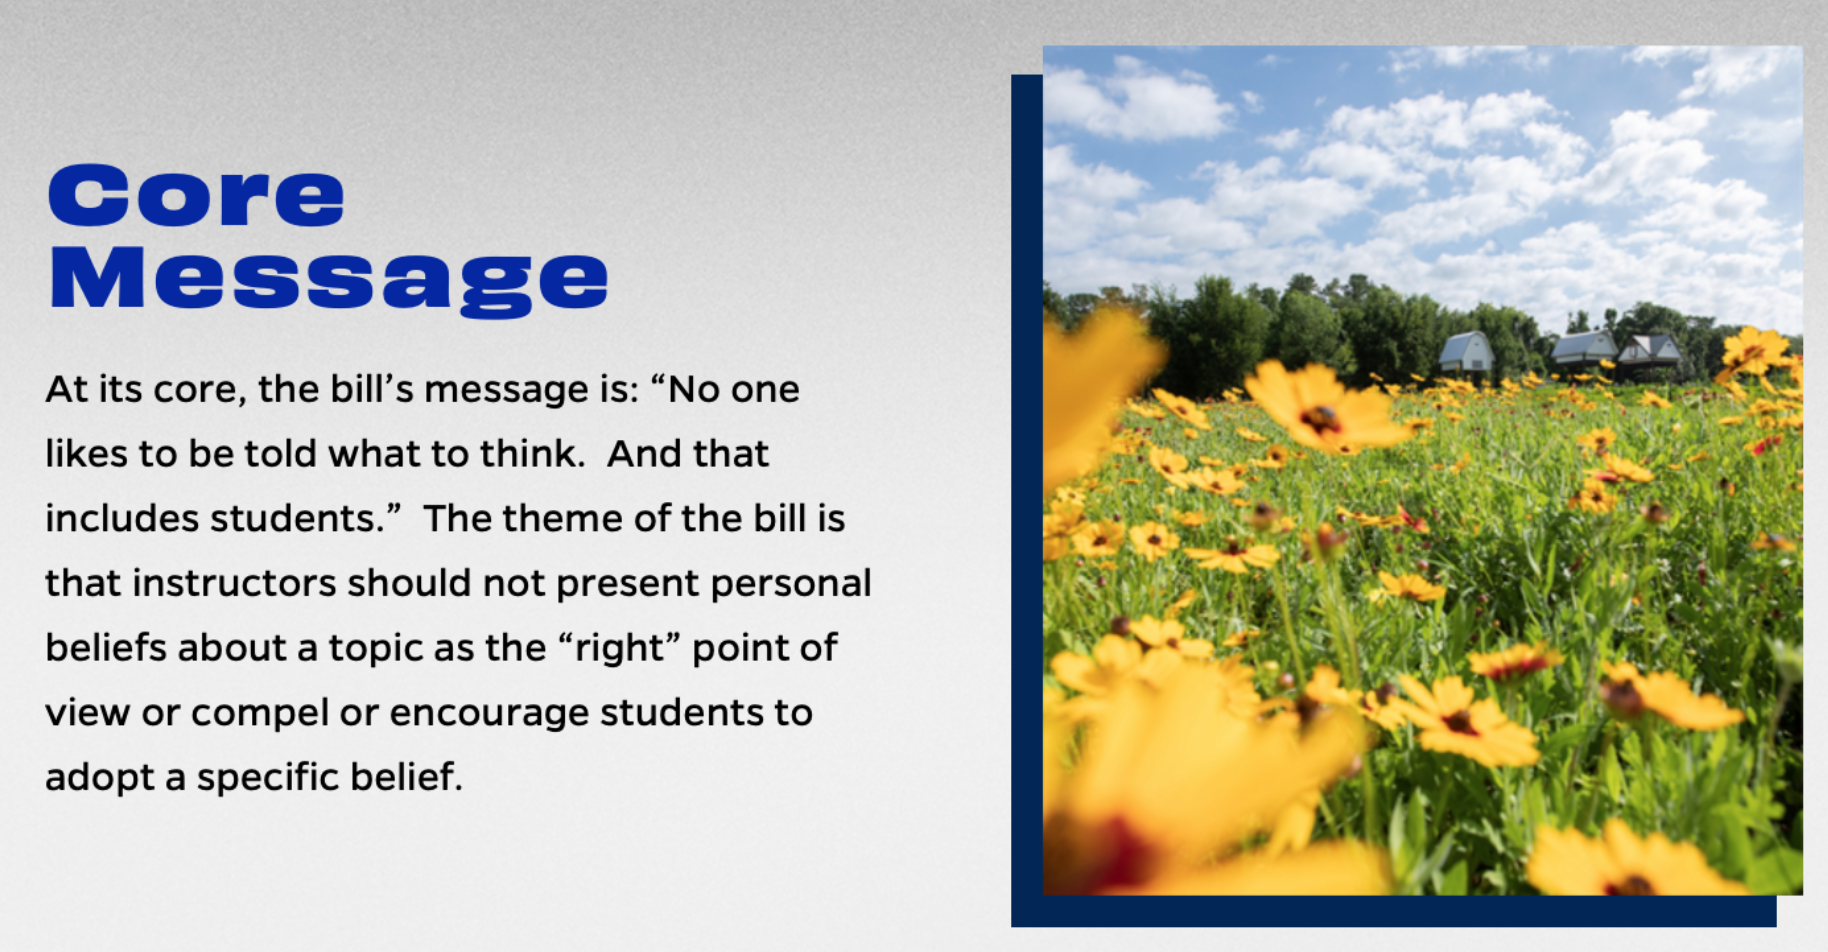 Core message: At its core, the bill's message is: "No one likes to be told what to think. And that includes students." The theme of the bill is that instructors should not present personal beliefs about a topic as the "right" point of view or compel or encourage students to adopt a specific belief.